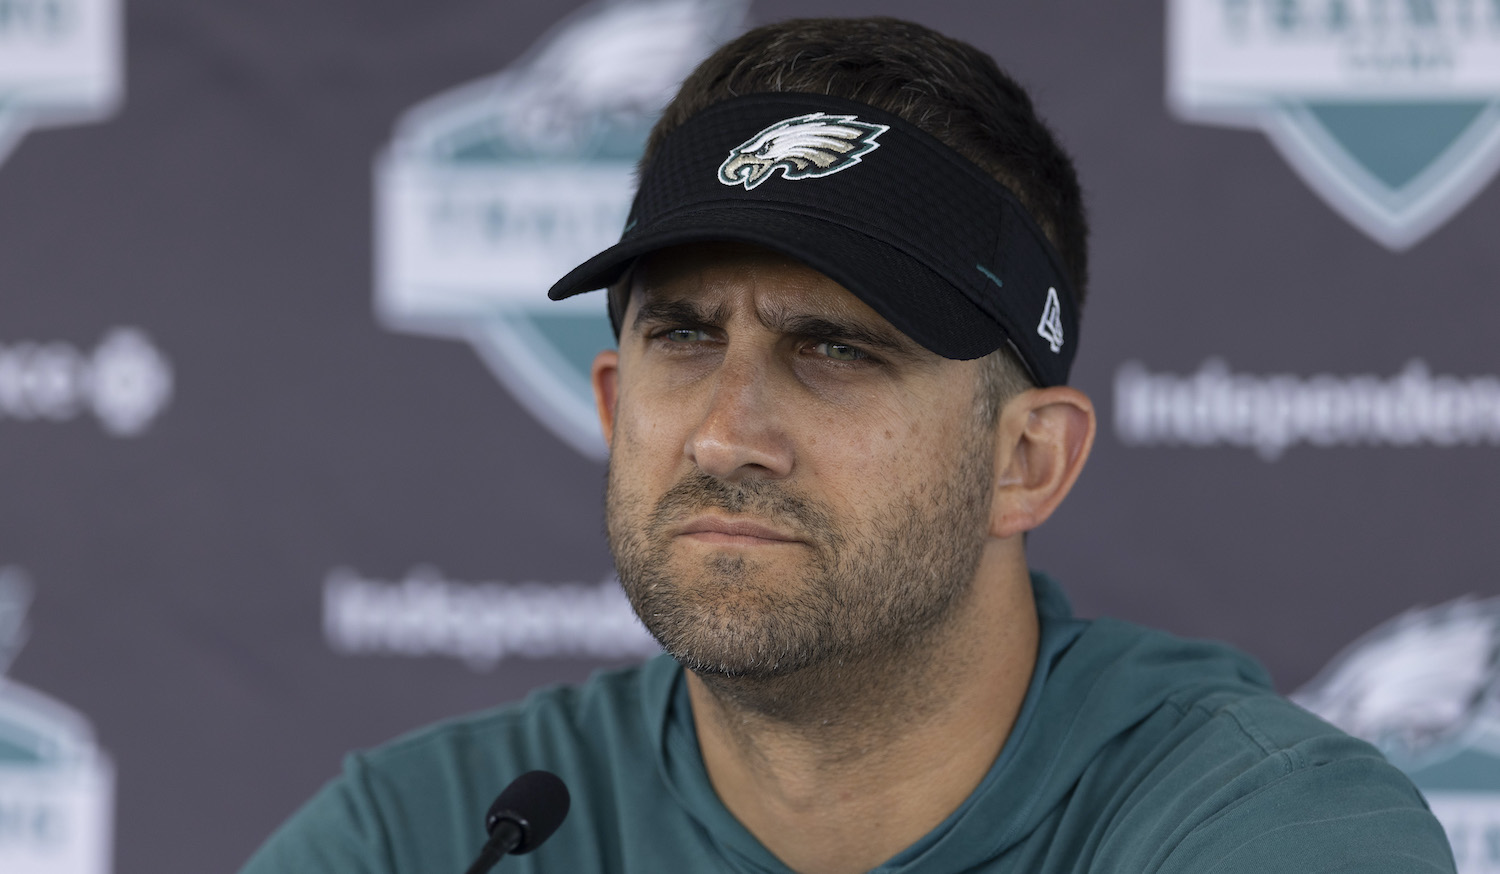 PHILADELPHIA, PA - JULY 28: Head coach Nick Sirianni of the Philadelphia Eagles talks to the media during training camp at the NovaCare Complex on July 28, 2021 in Philadelphia, Pennsylvania. (Photo by Mitchell Leff/Getty Images)